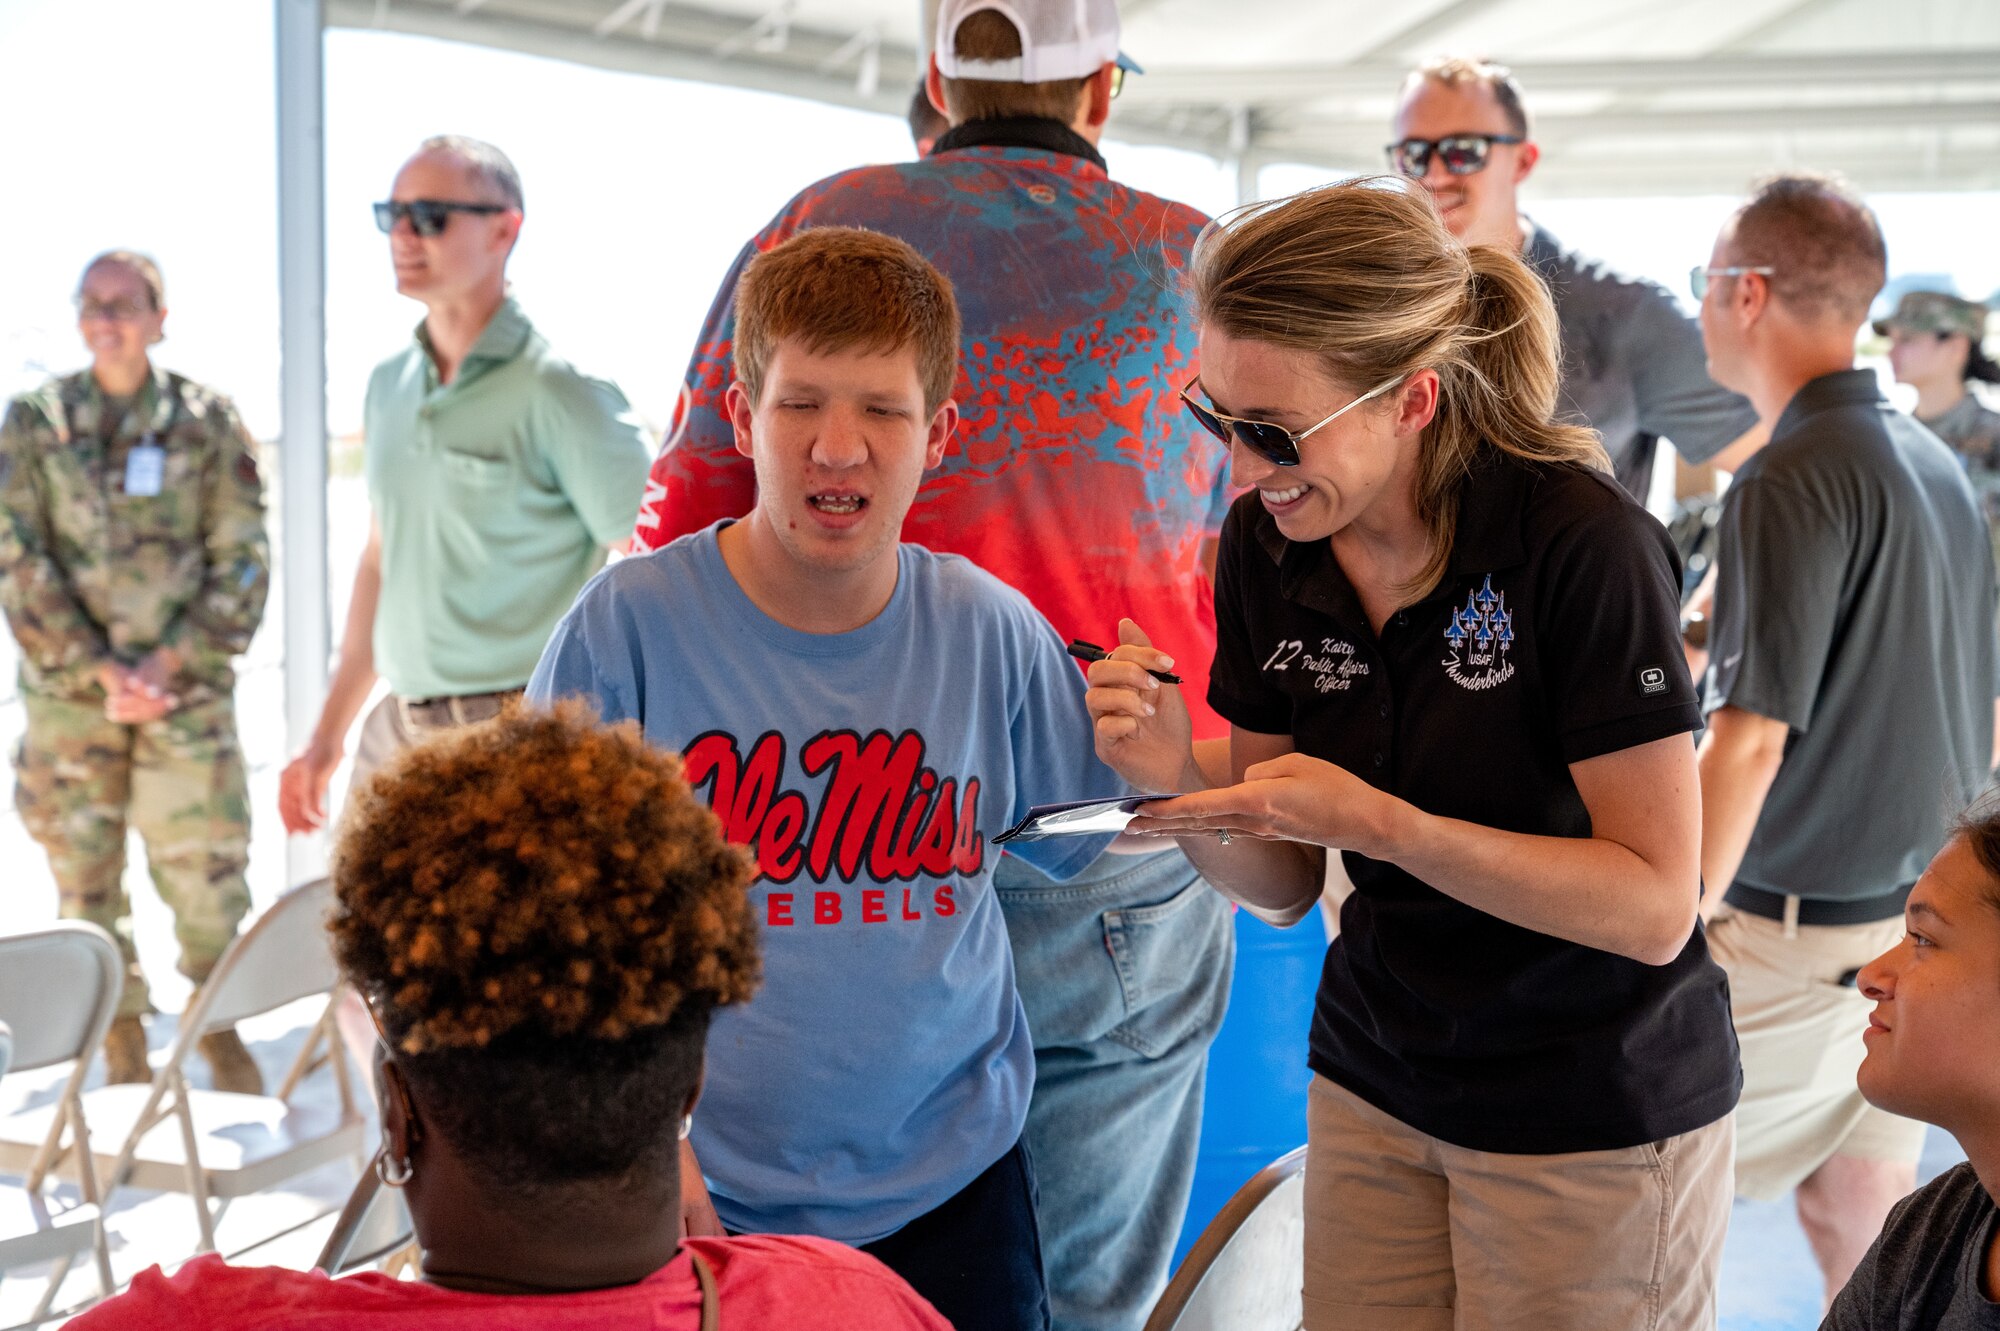 U.S. Air Force Capt. Kaity Toner, Thunderbird 12 public affairs officer, converses with Special Olympics Mississippi athletes and guests during a Thunderbirds meet and greet at Biloxi Beach in Biloxi, Mississippi, April 28, 2023. SOMS athletes and their guests were able to view a practice session for the 2023 Thunder Over the Sound Air and Space Show and meet the Thunderbirds. (U.S. Air Force photo by Airman 1st Class Trenten Walters)